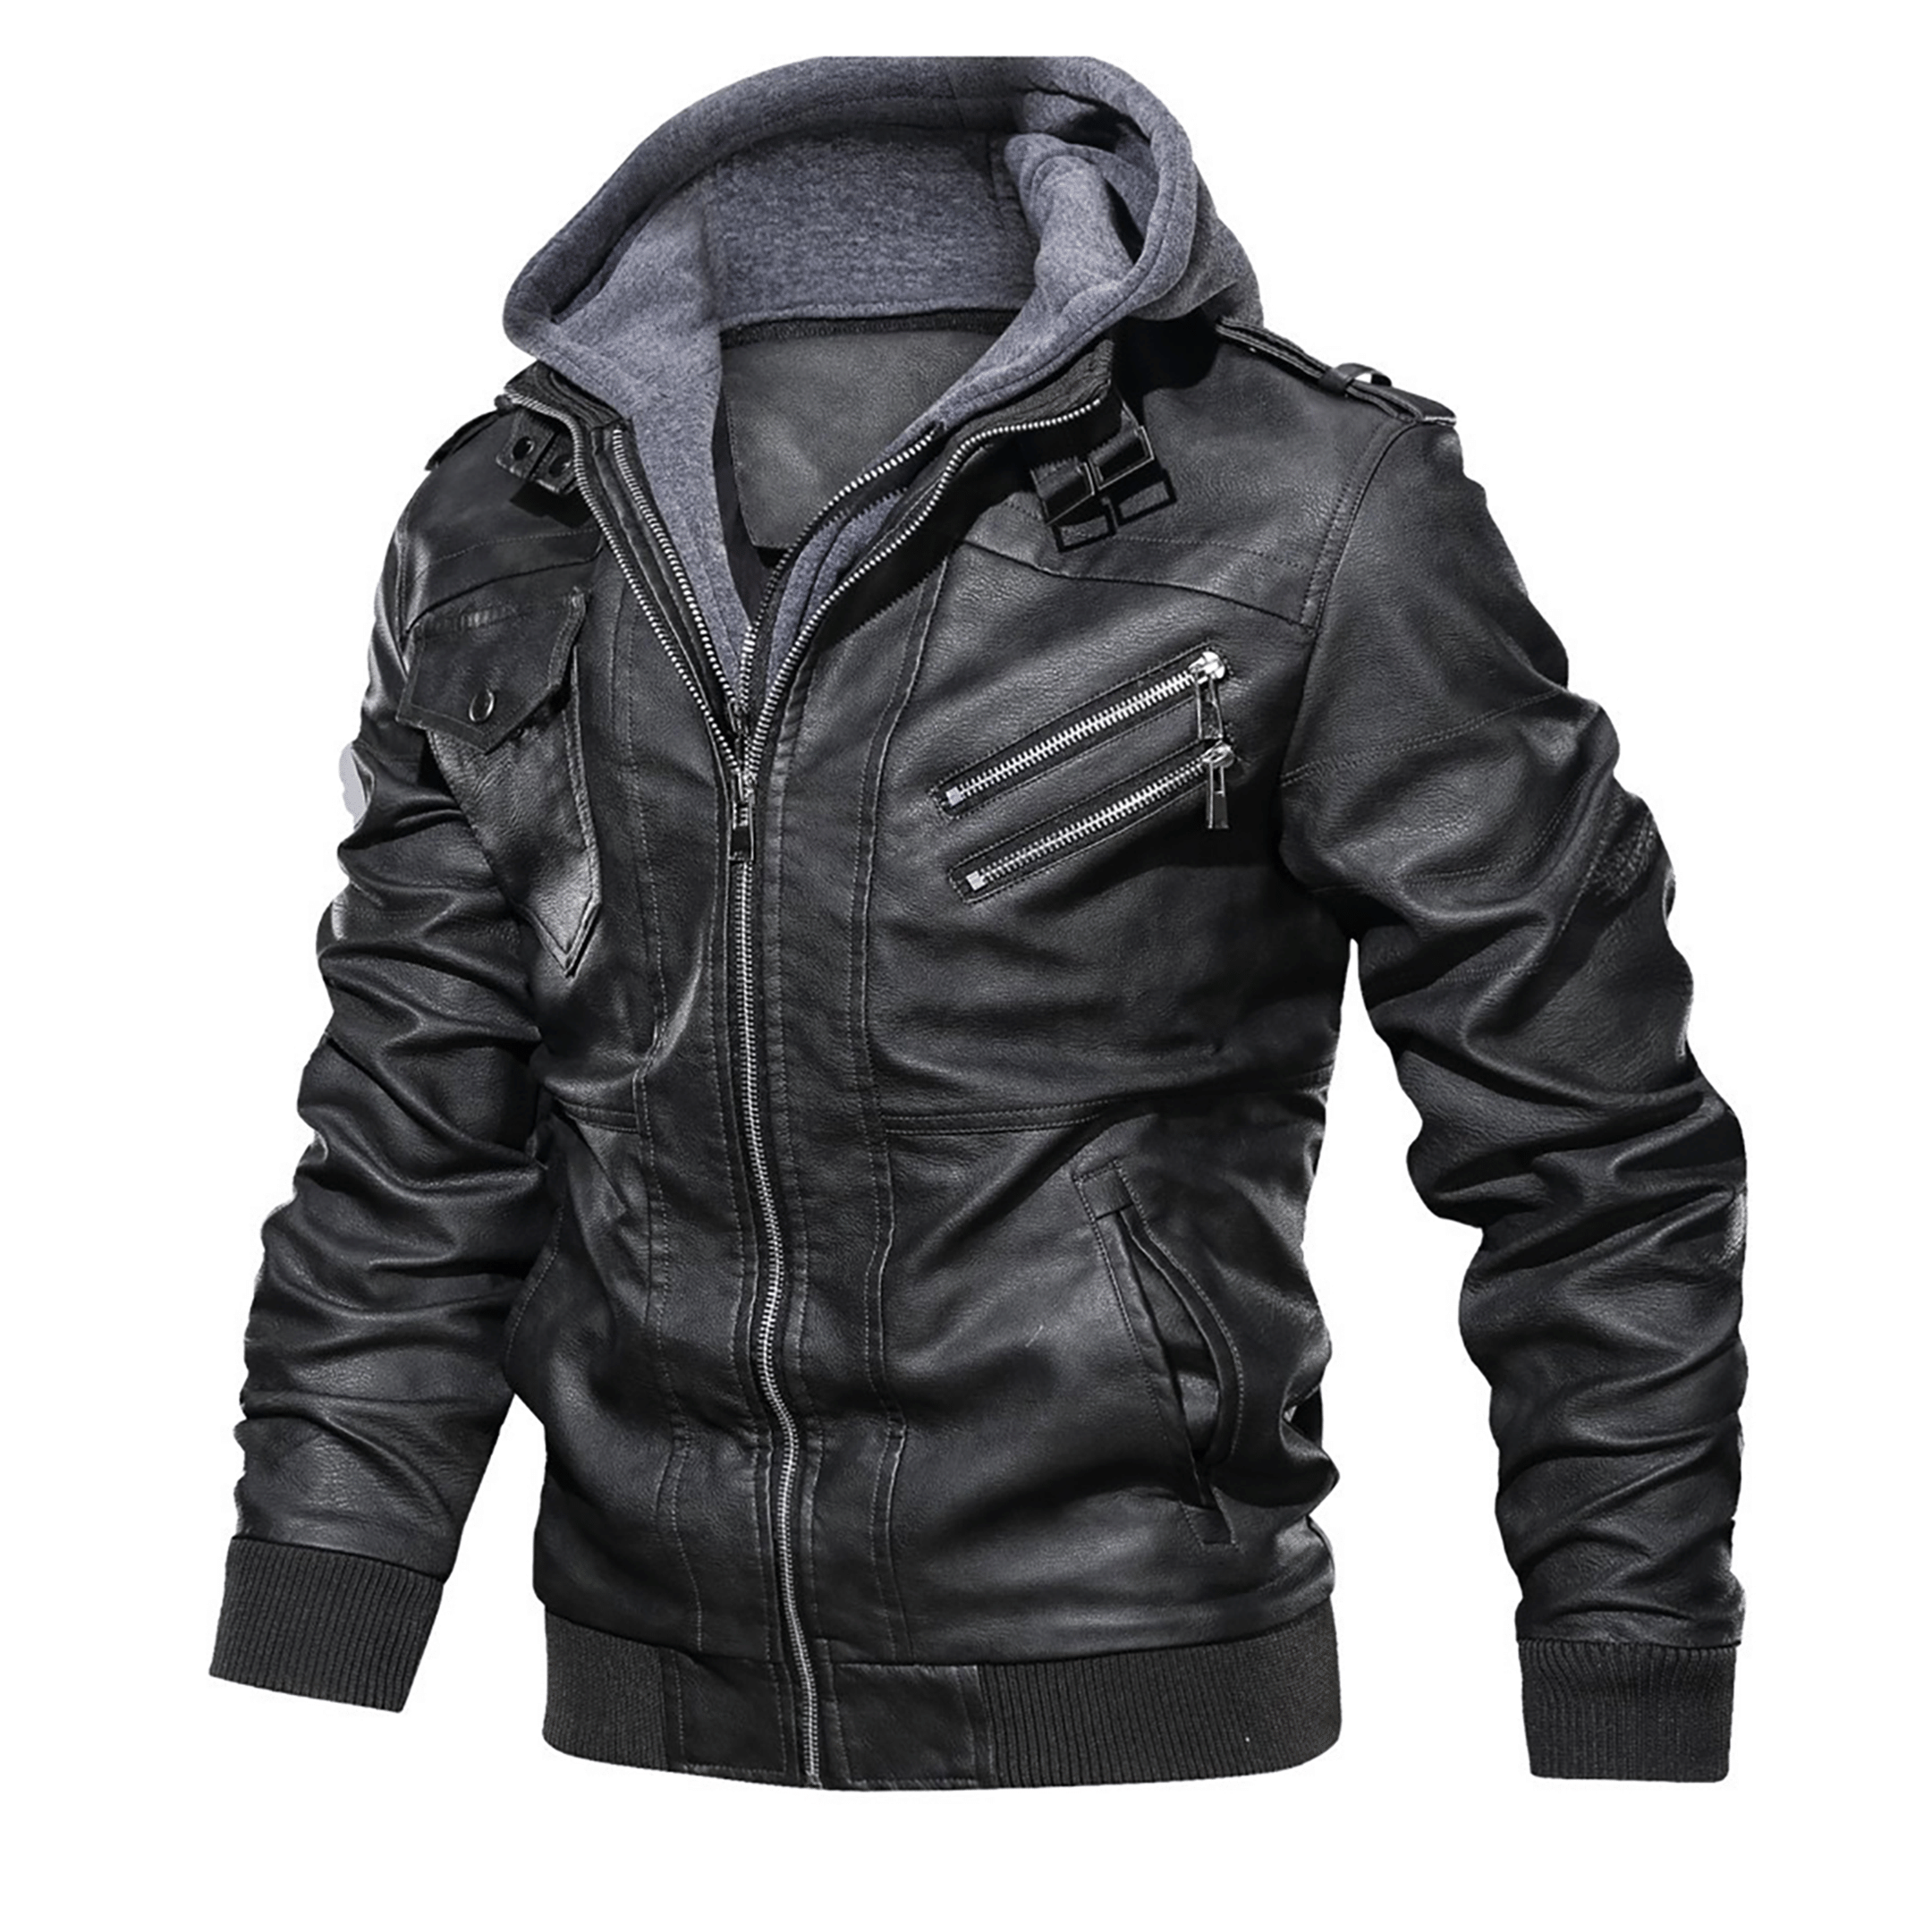 Top leather jackets and latest products 443